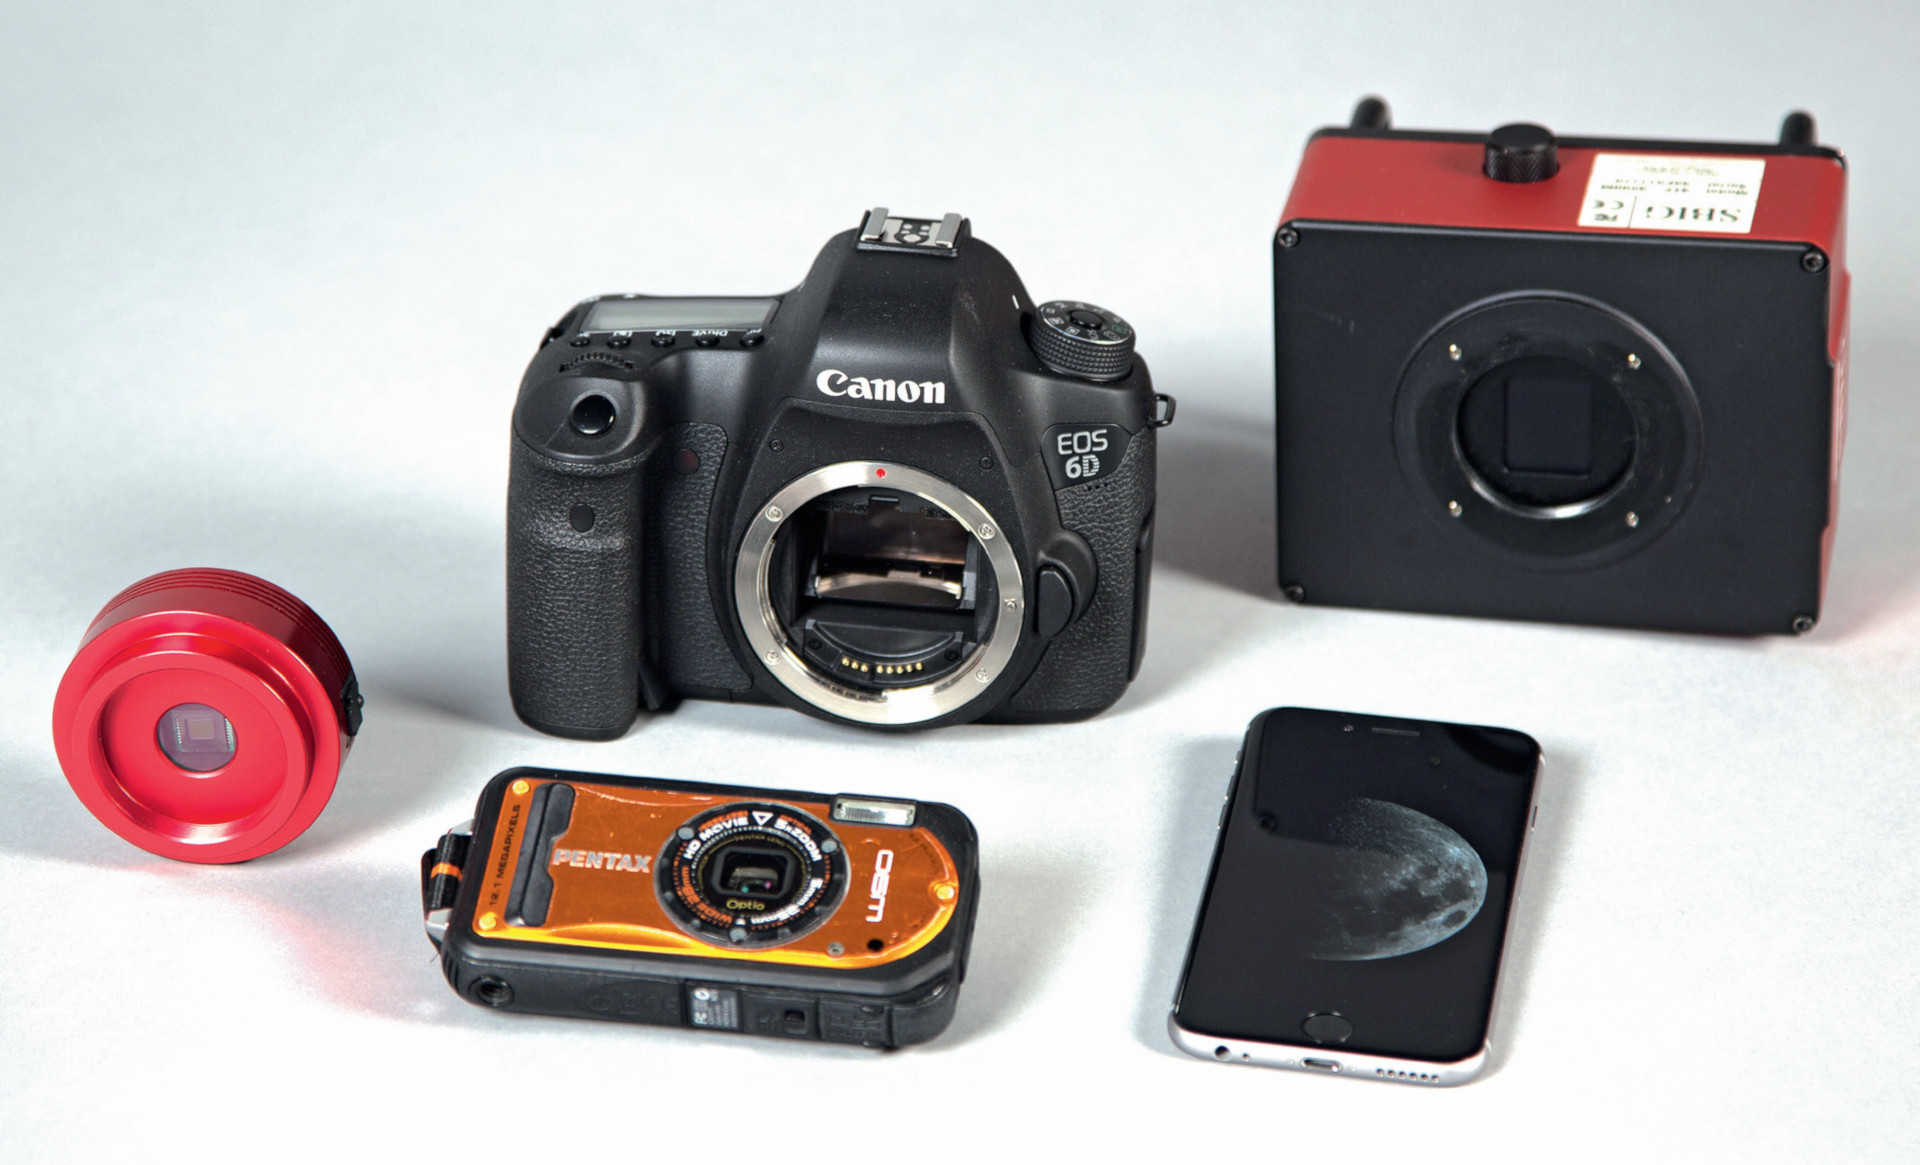 There's a huge choice of cameras available, ranging from smartphone cameras to classic compact cameras and uncooled CCD cameras, to digital SLR cameras and cooled Astro CCD cameras. Due to their differing strengths and weaknesses, these various types of cameras are suitable for different astrophotography applications in different ways – but a simple camera is actually all you need to get you started. U. Dittler